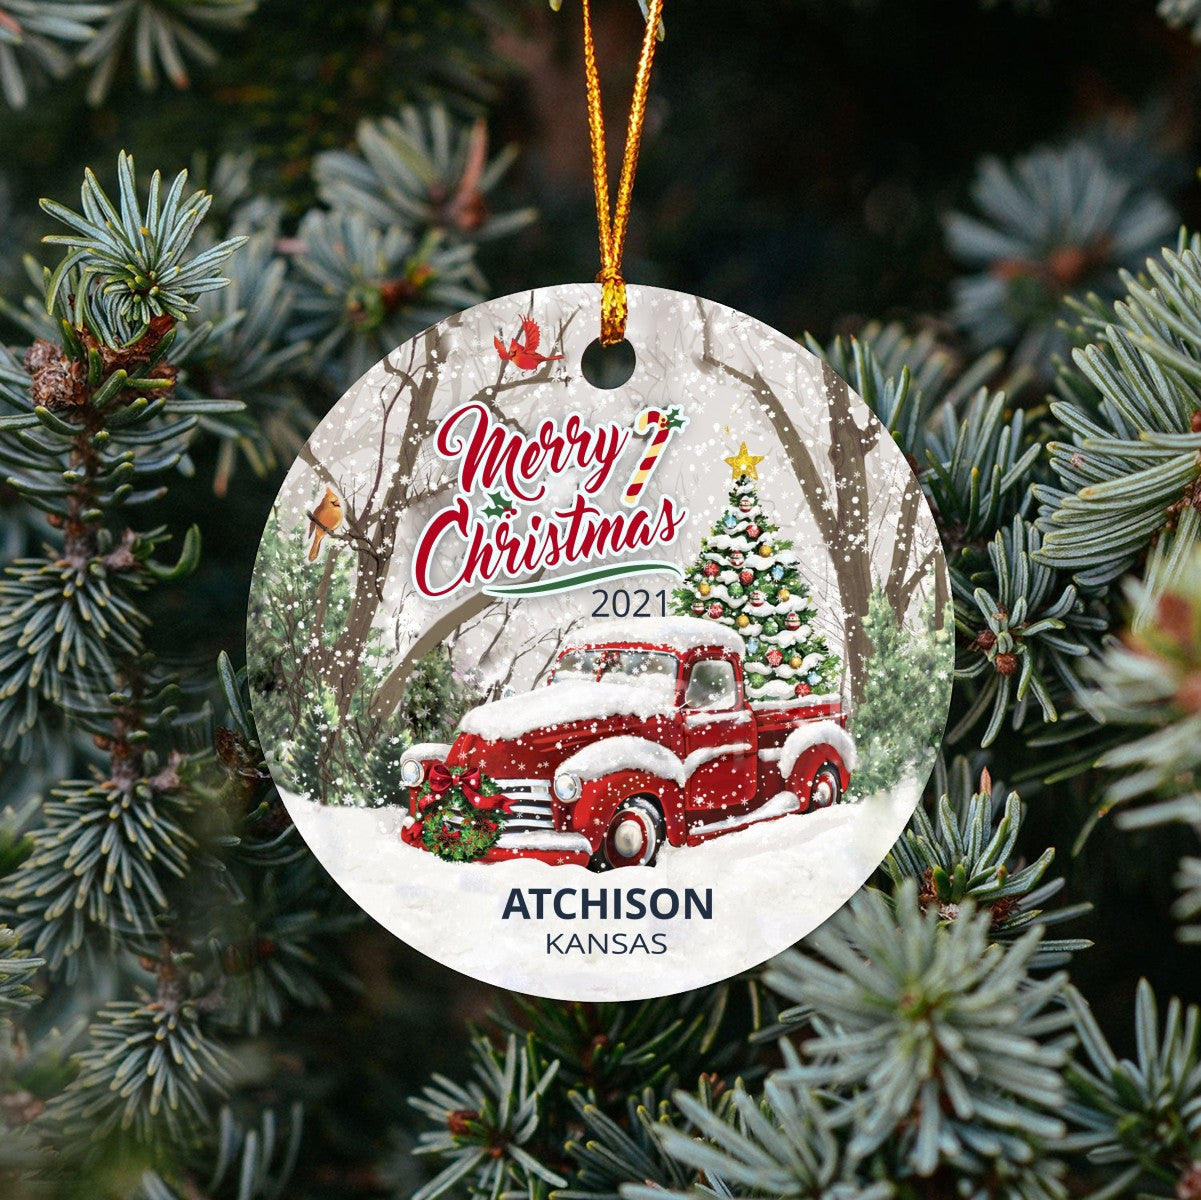 Christmas Tree Ornaments Atchison - Ornament Customize With Name City And State Atchison Kansas KS - Red Truck Xmas Ornaments 3'' Plastic Gift For Family, Friend And Housewarming